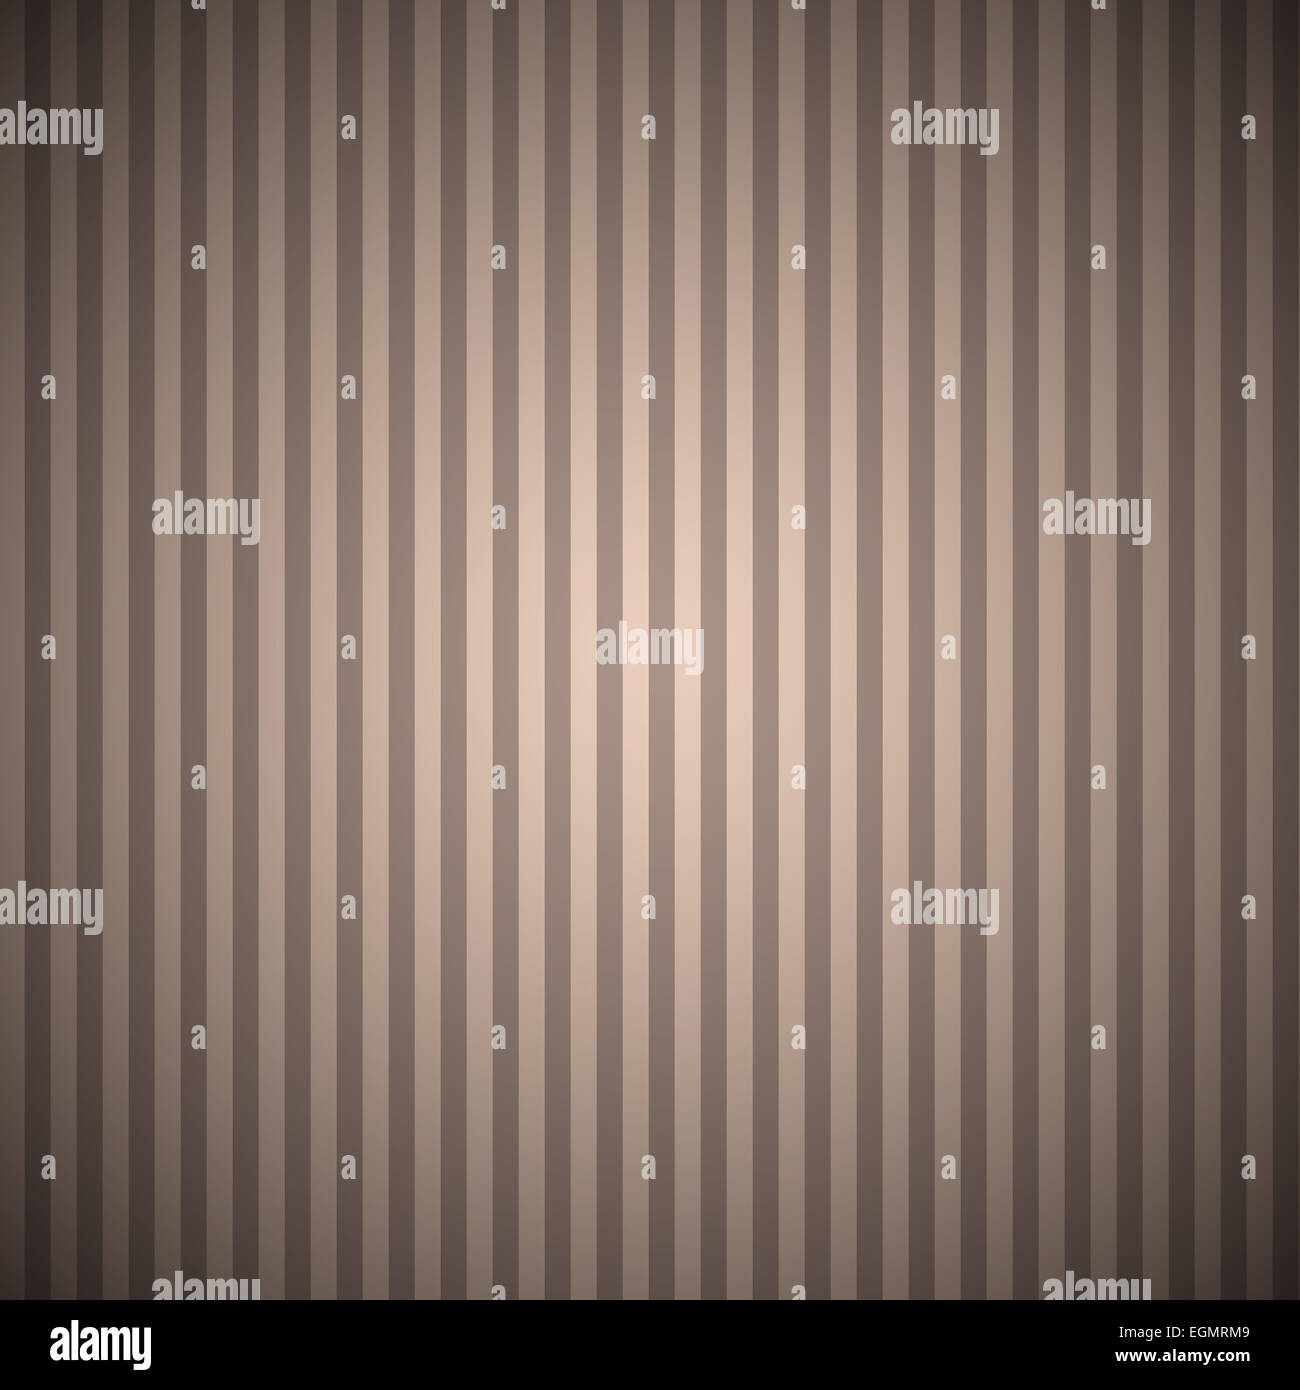 Vintage Beige and Brown Striped Seamless Pattern Background with Corner Vignetting Saved in Swatches Panel Stock Photo